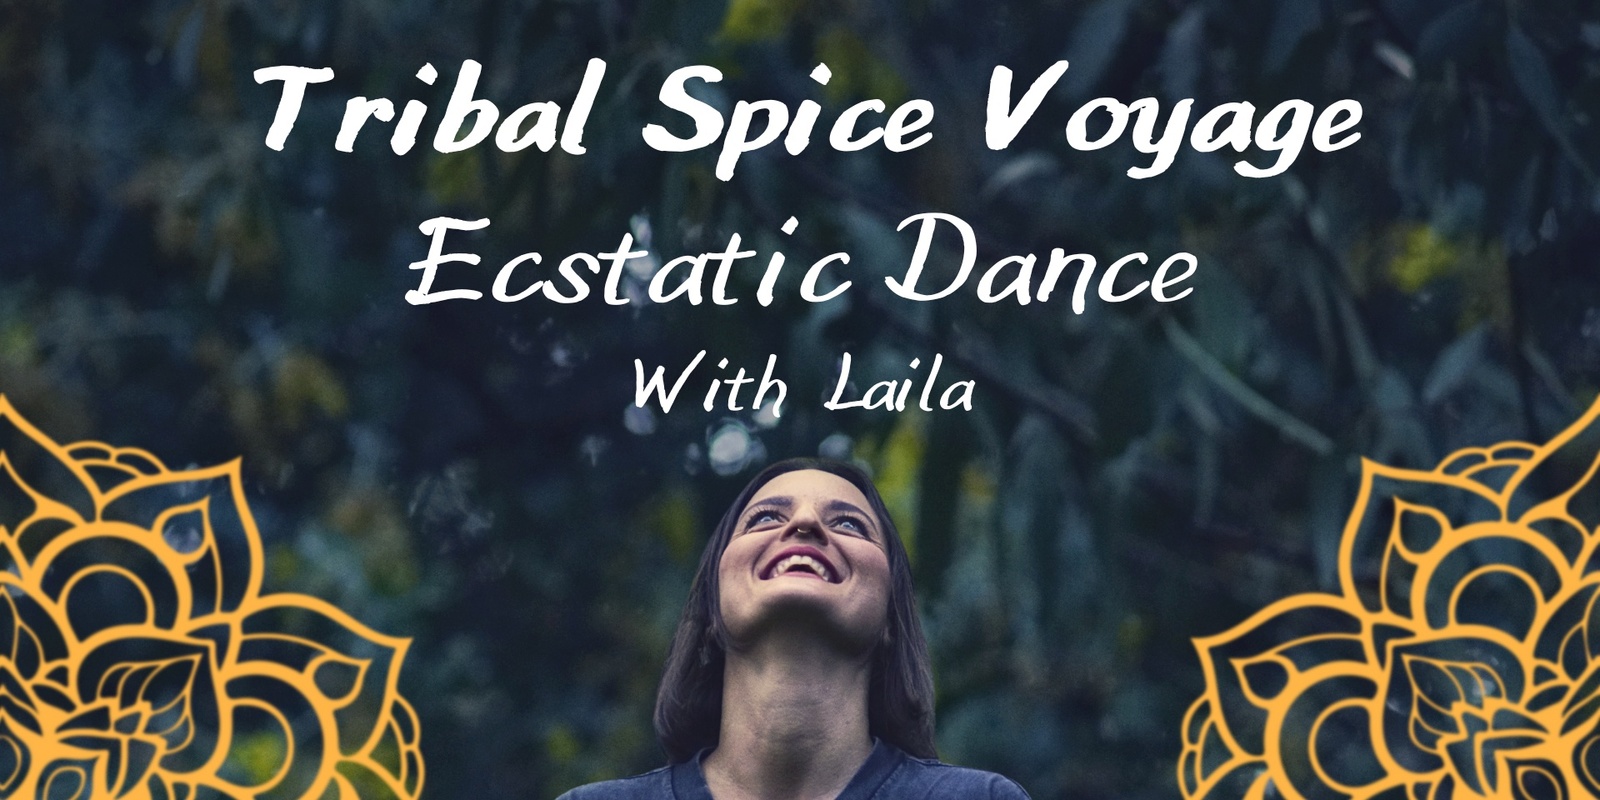 Banner image for Tribal Spice Voyage with dj Laila